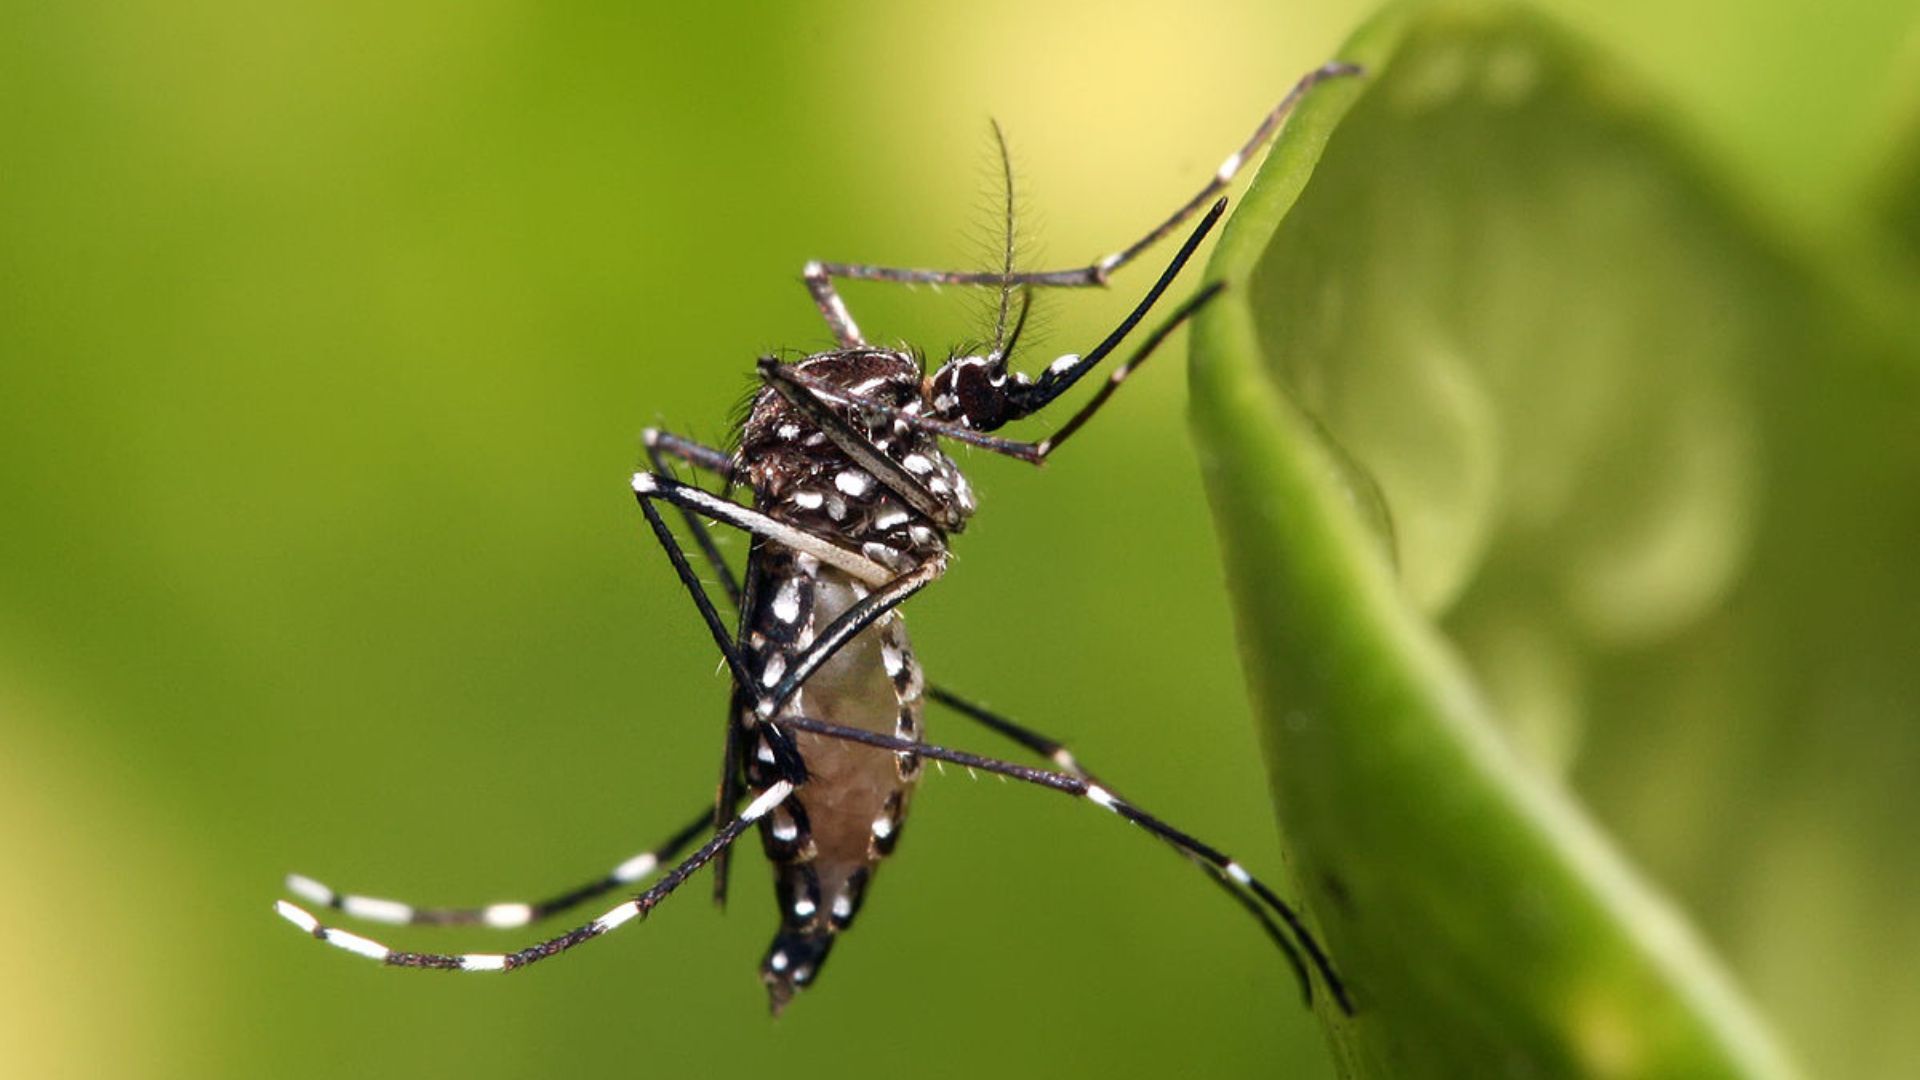 Mosquito-borne diseases and their consequences in construction industry